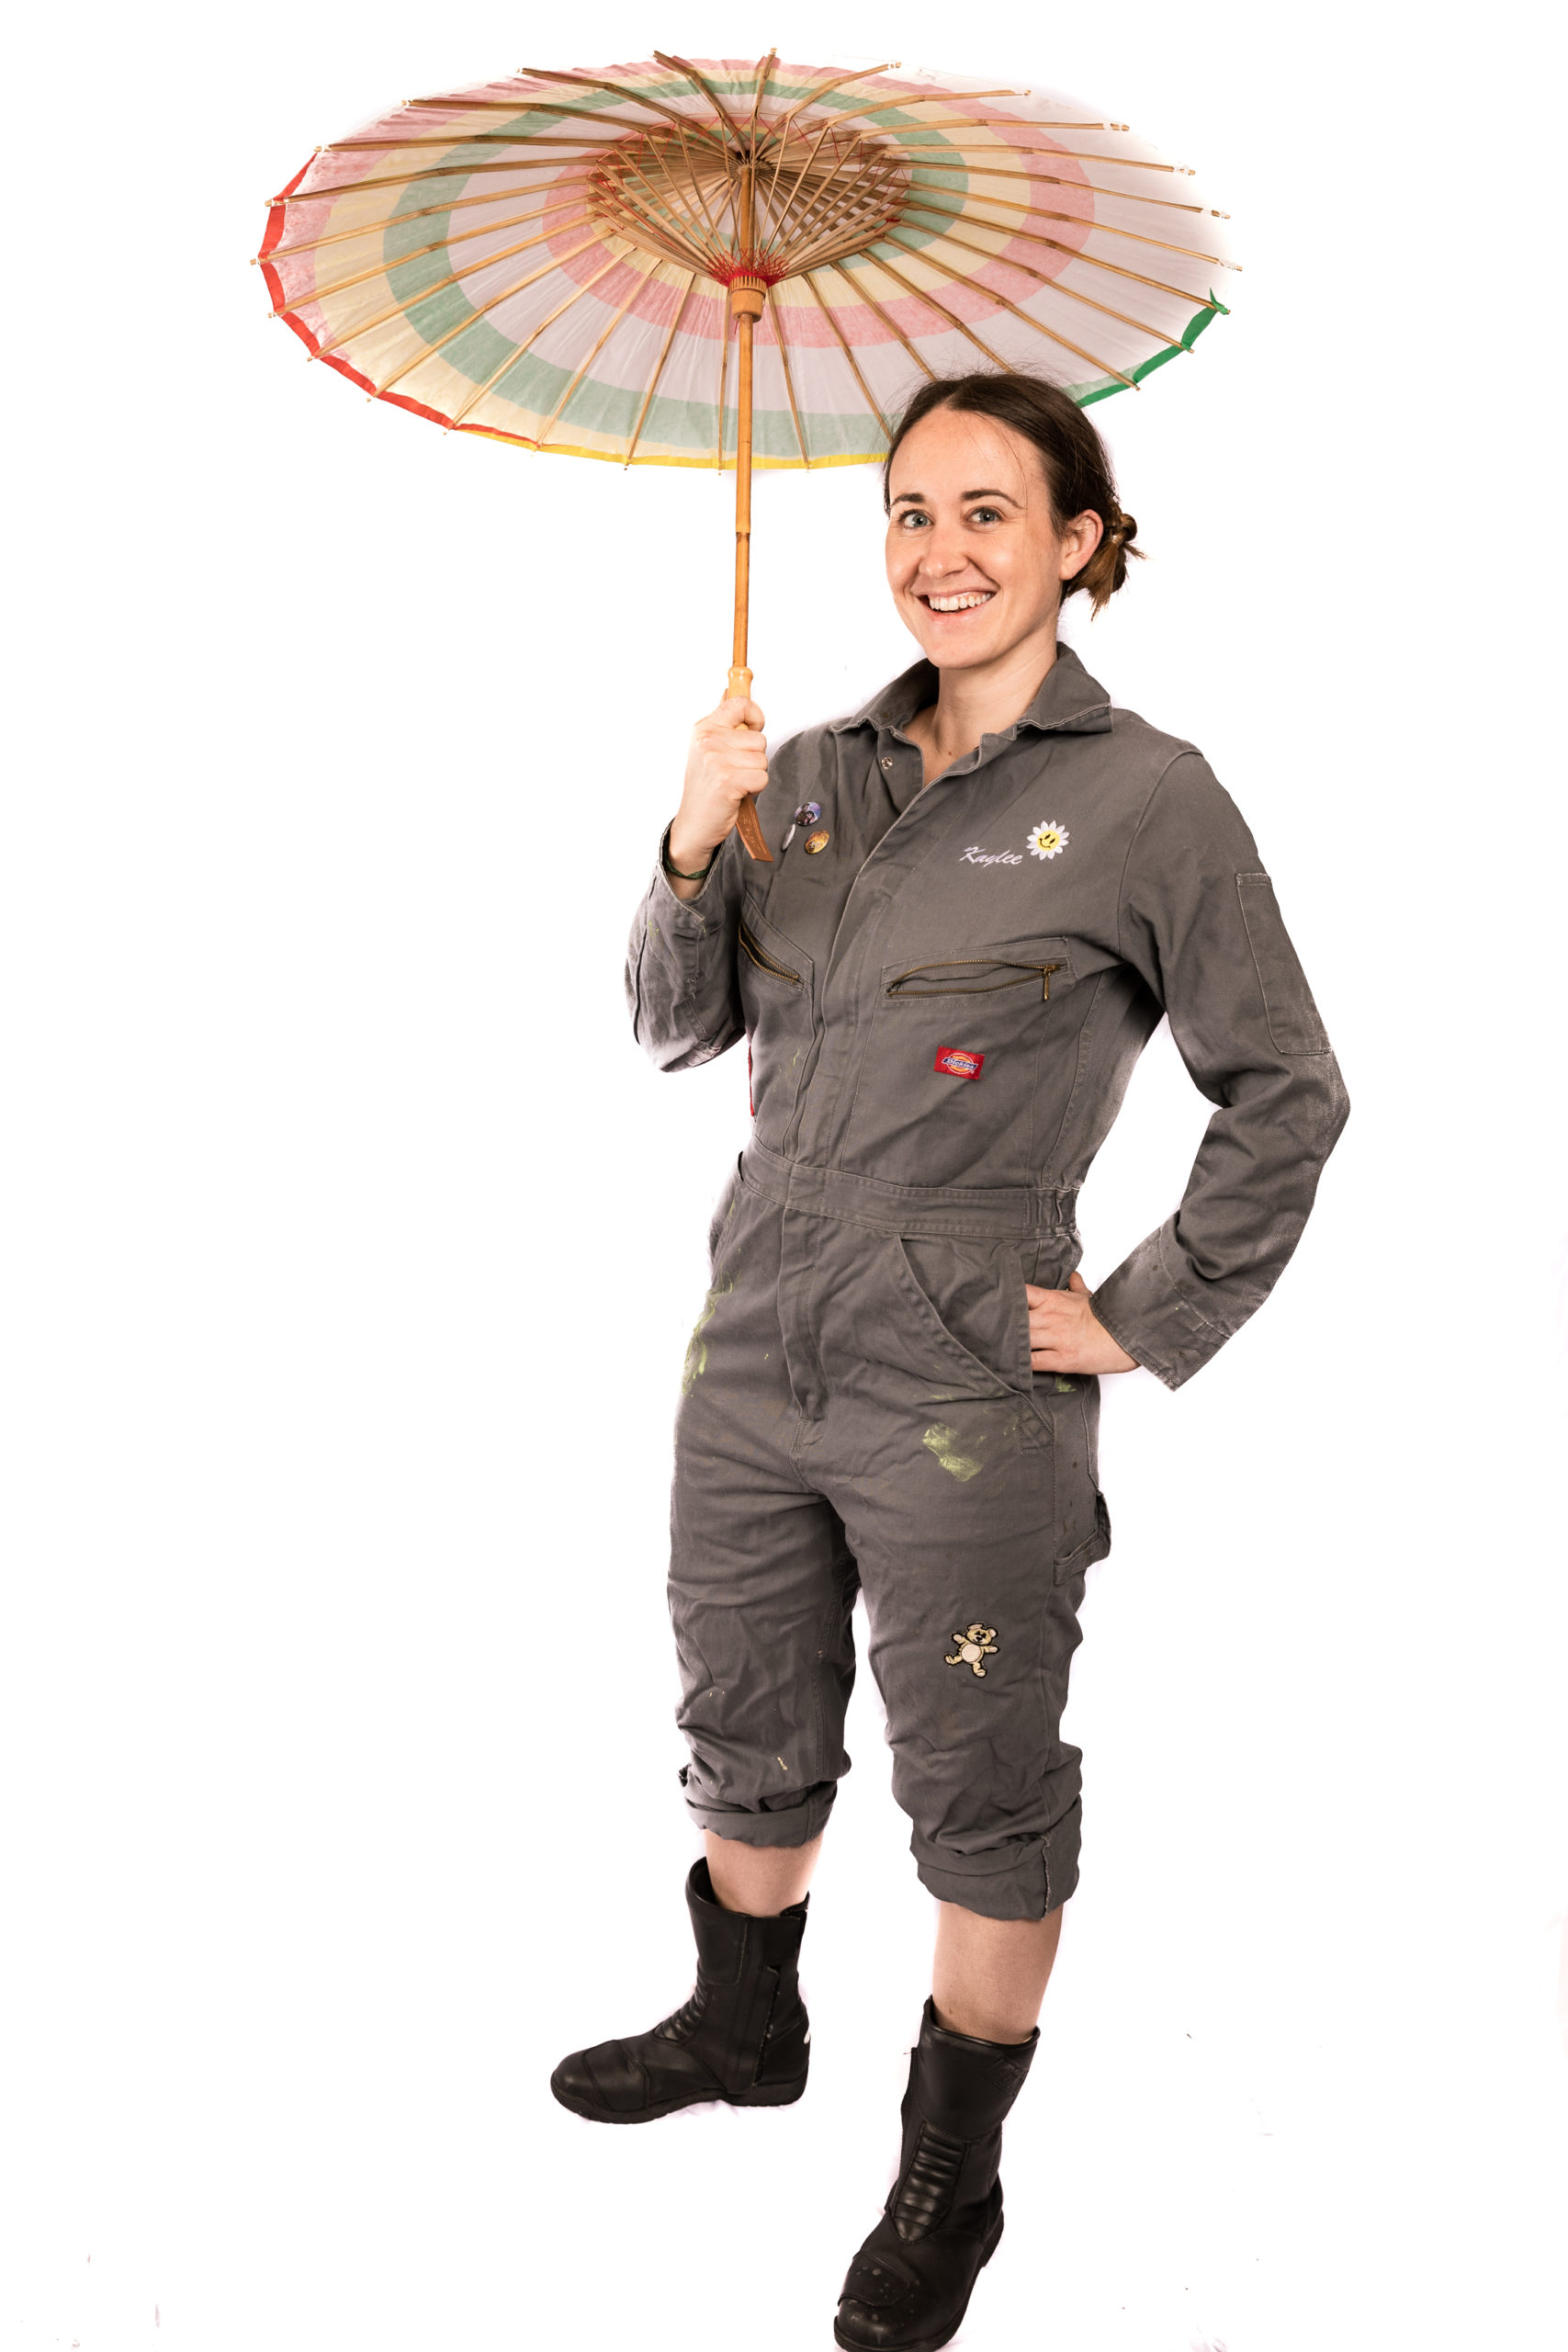 Firefly Kaylees Silk Parasol Hand Painted Tri-Colored Costume Cosplay Replica 